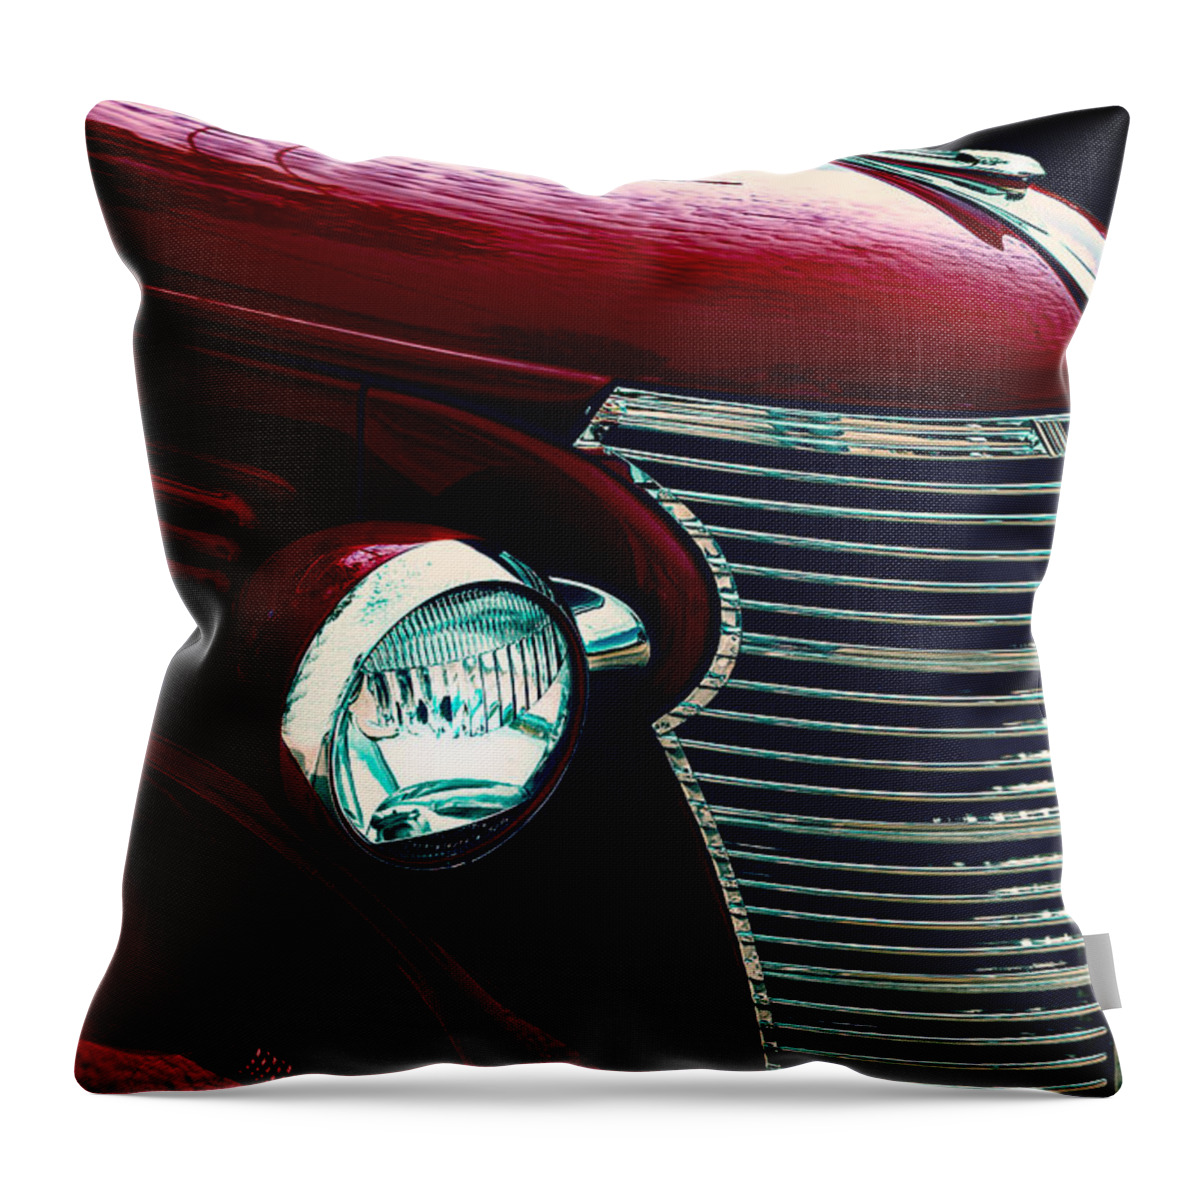 Red Throw Pillow featuring the photograph Classic Red Truck by Carrie Hannigan